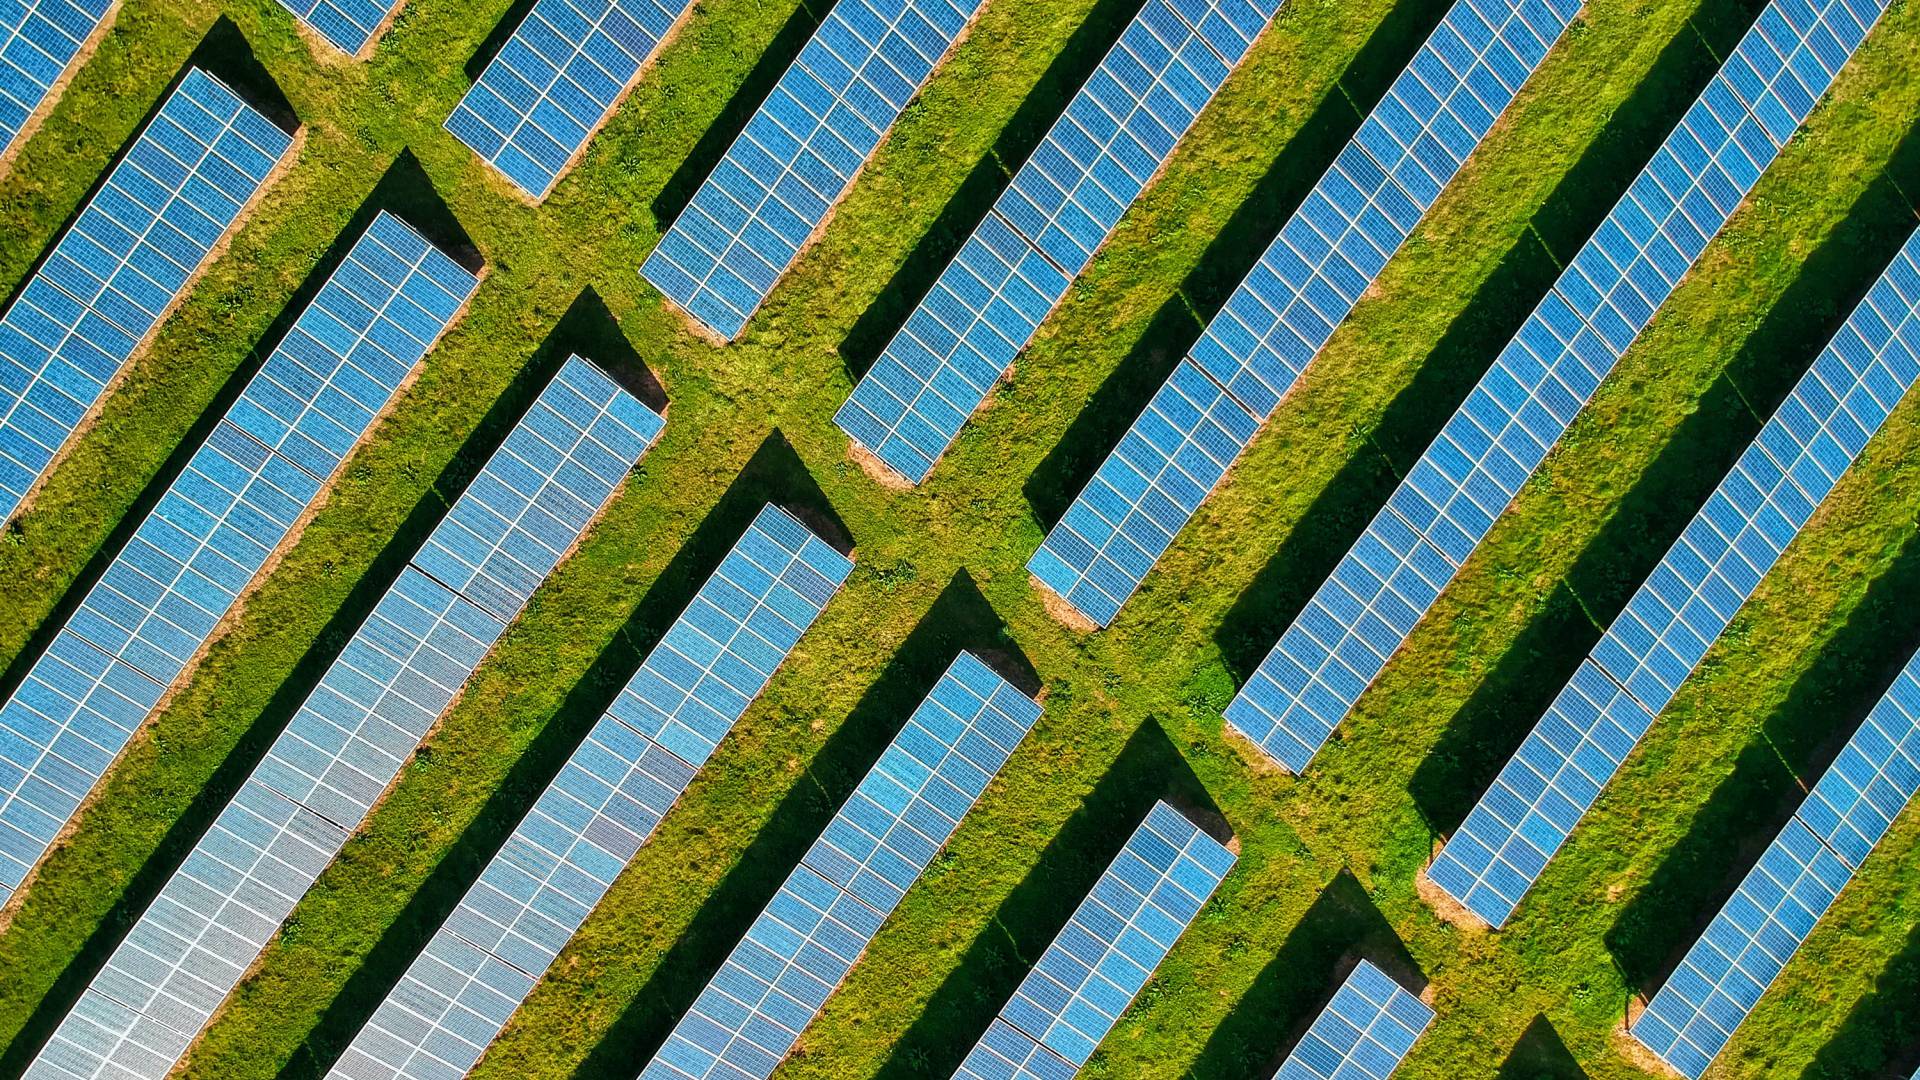 Aerial of solar panels in a field